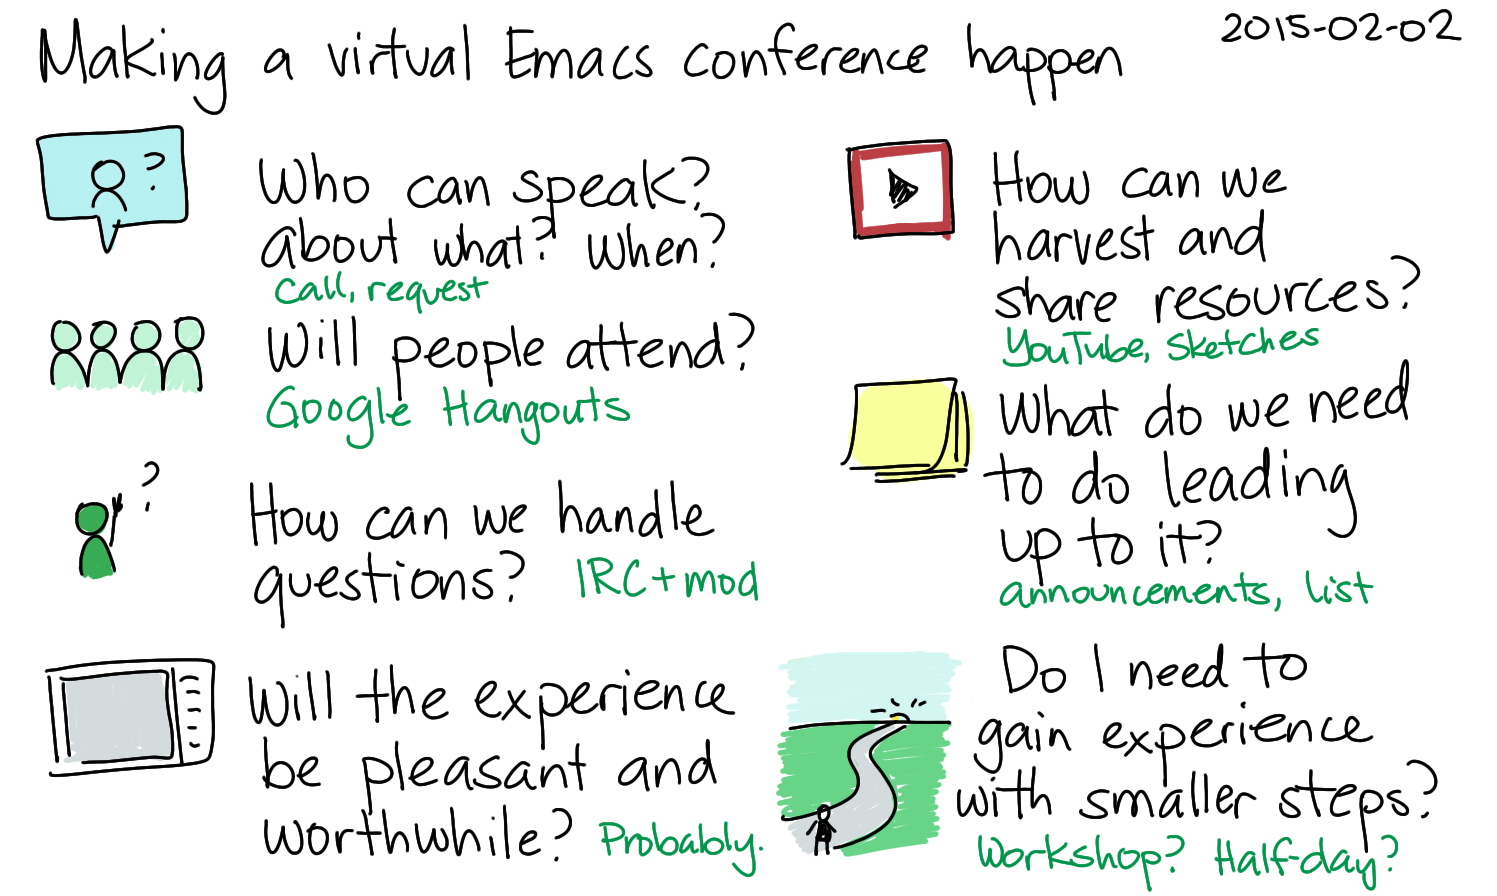 Figure 1: “2015-02-02 Making a virtual Emacs conference happen – index card #emacs #organizing-people #conference #planning #questions” by sachac is licensed under CC BY 2.0. To view a copy of this license, visit https://creativecommons.org/licenses/by/2.0/?ref=openverse.